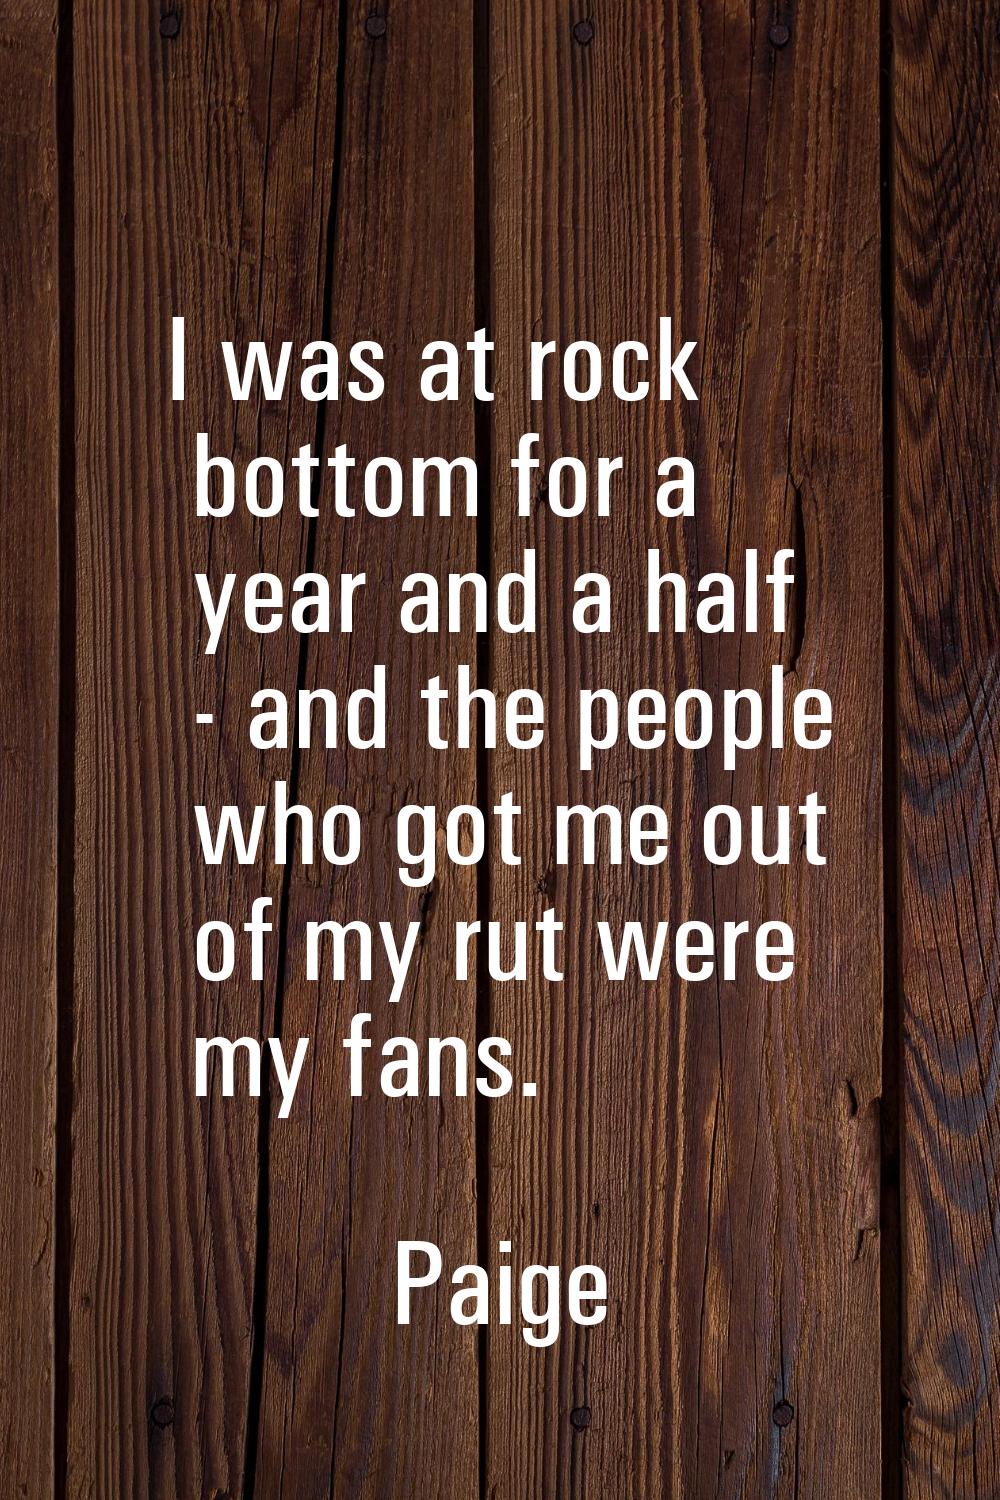 I was at rock bottom for a year and a half - and the people who got me out of my rut were my fans.